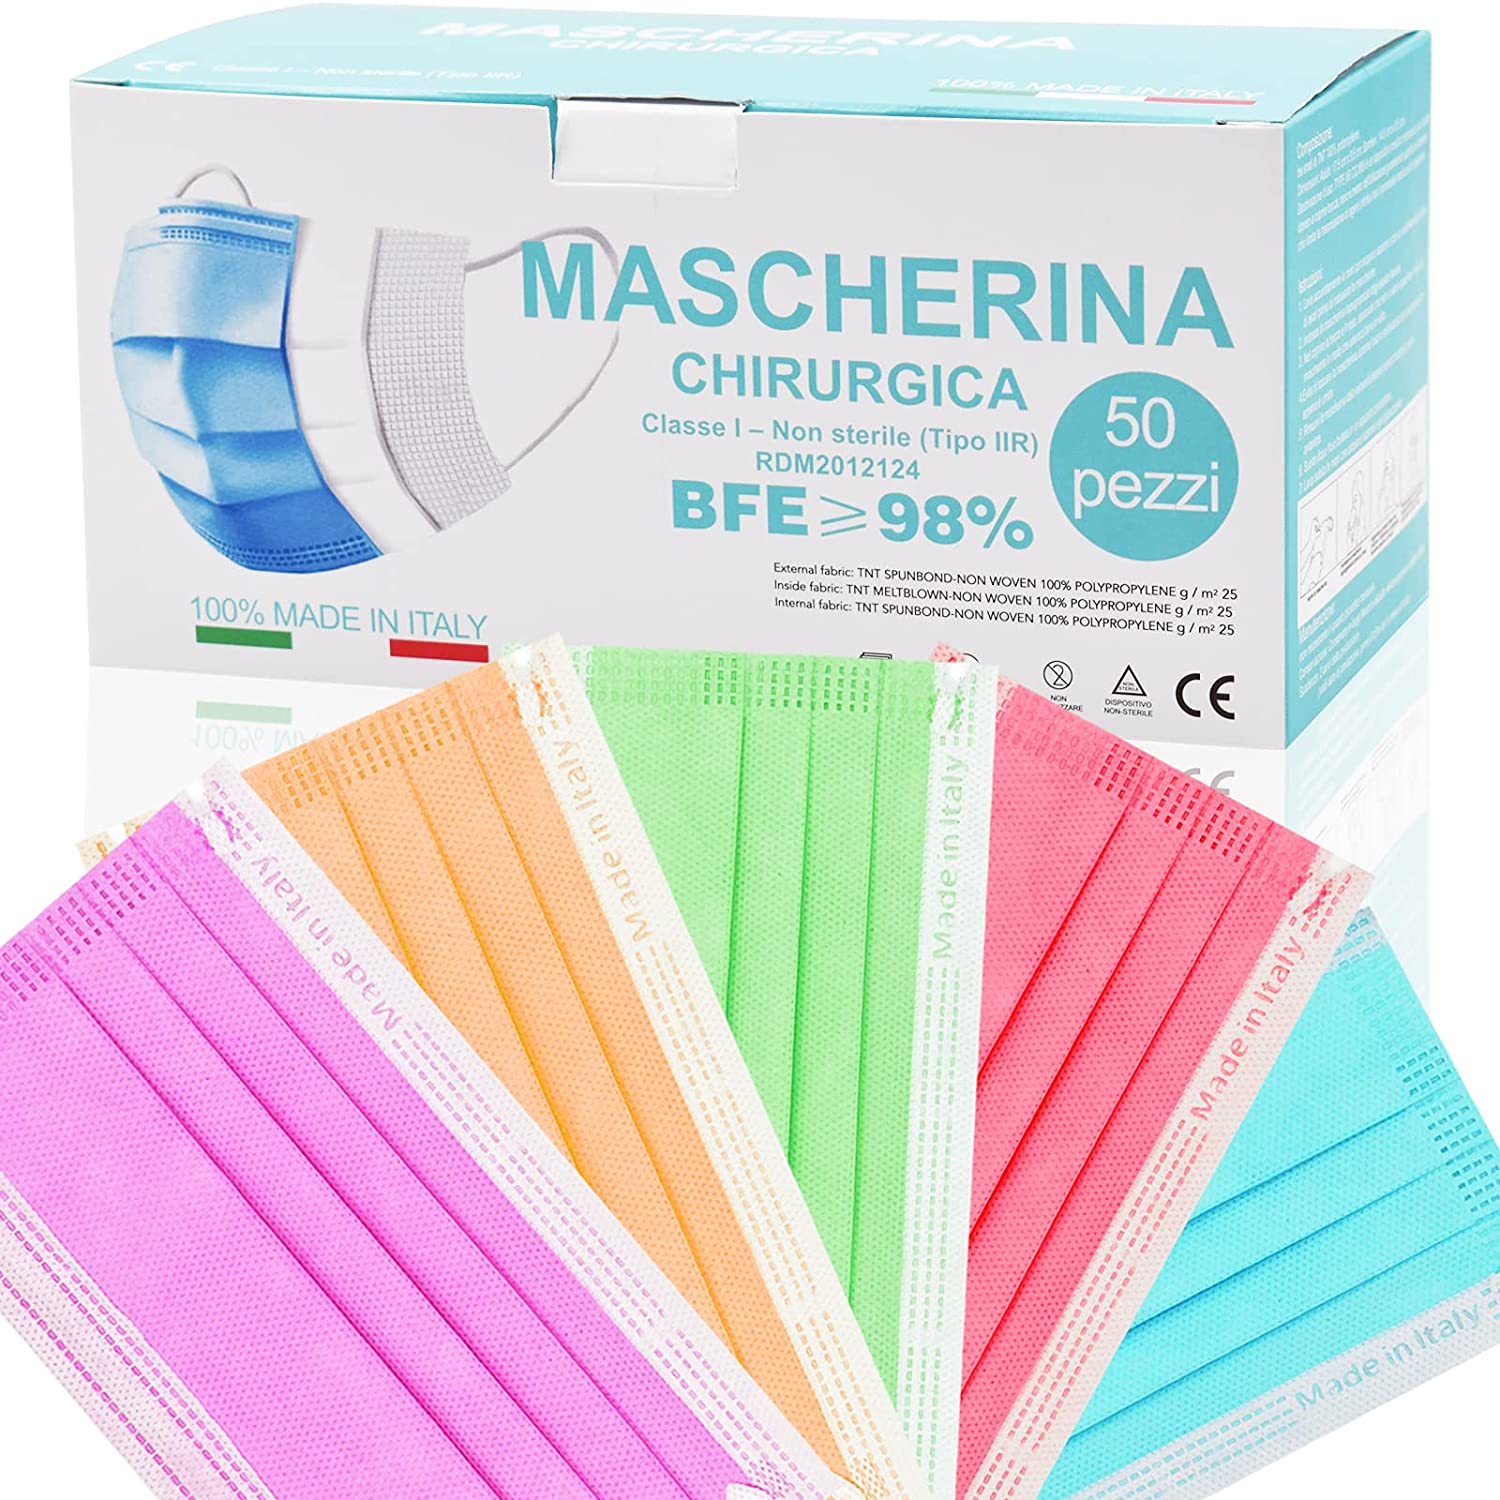 Mascherine Colorate Monouso MADE IN ITALY Certificate Tipo IIR,Nasello –